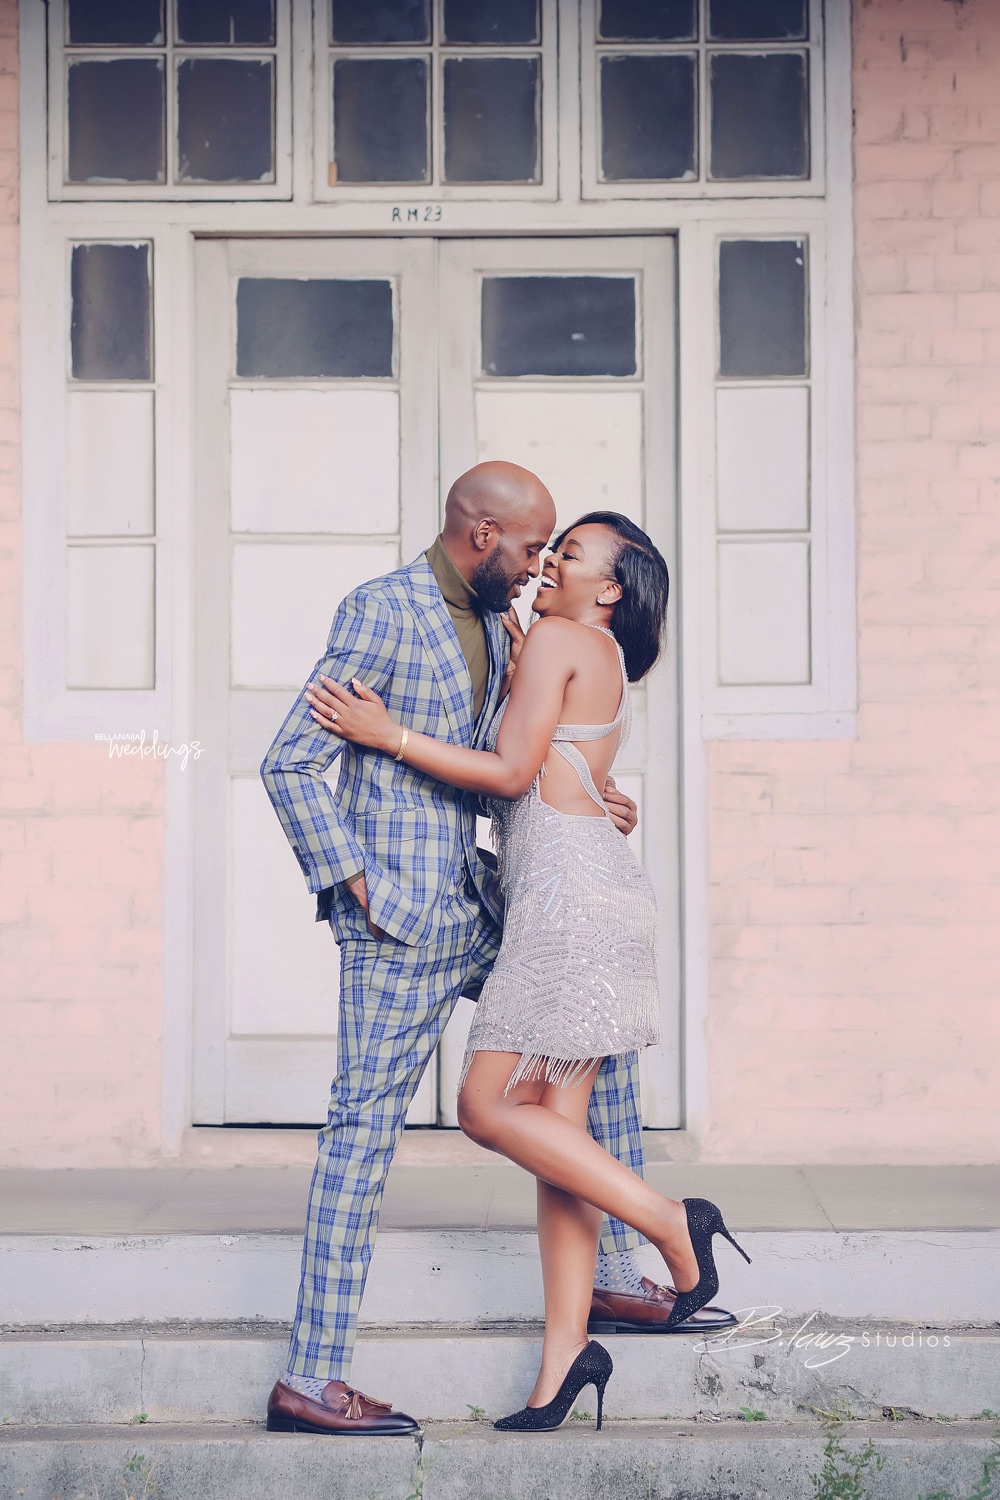 Picture Perfect Pre Wedding Images Of Nigerian Rapper Ikechukwu and his bride Ella